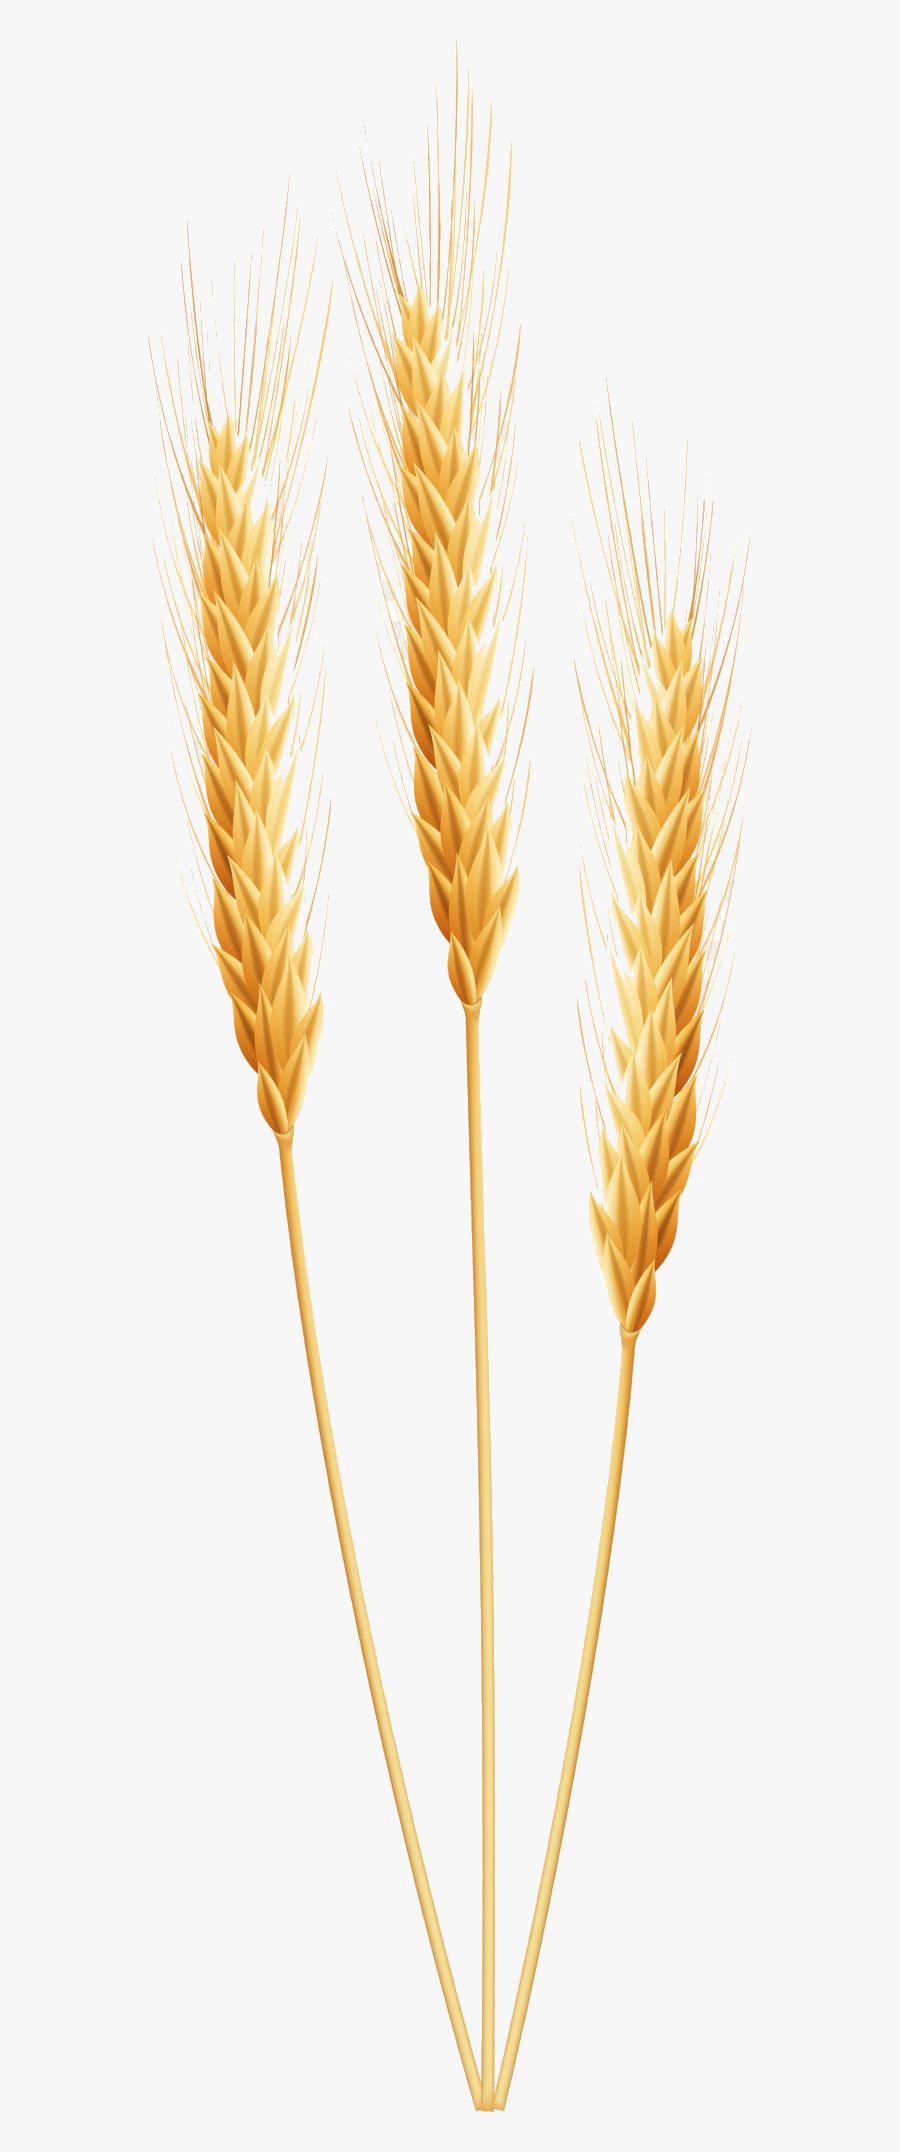 Wheat Clipart Wheet Free On Transparent Png, Transparent Clipart